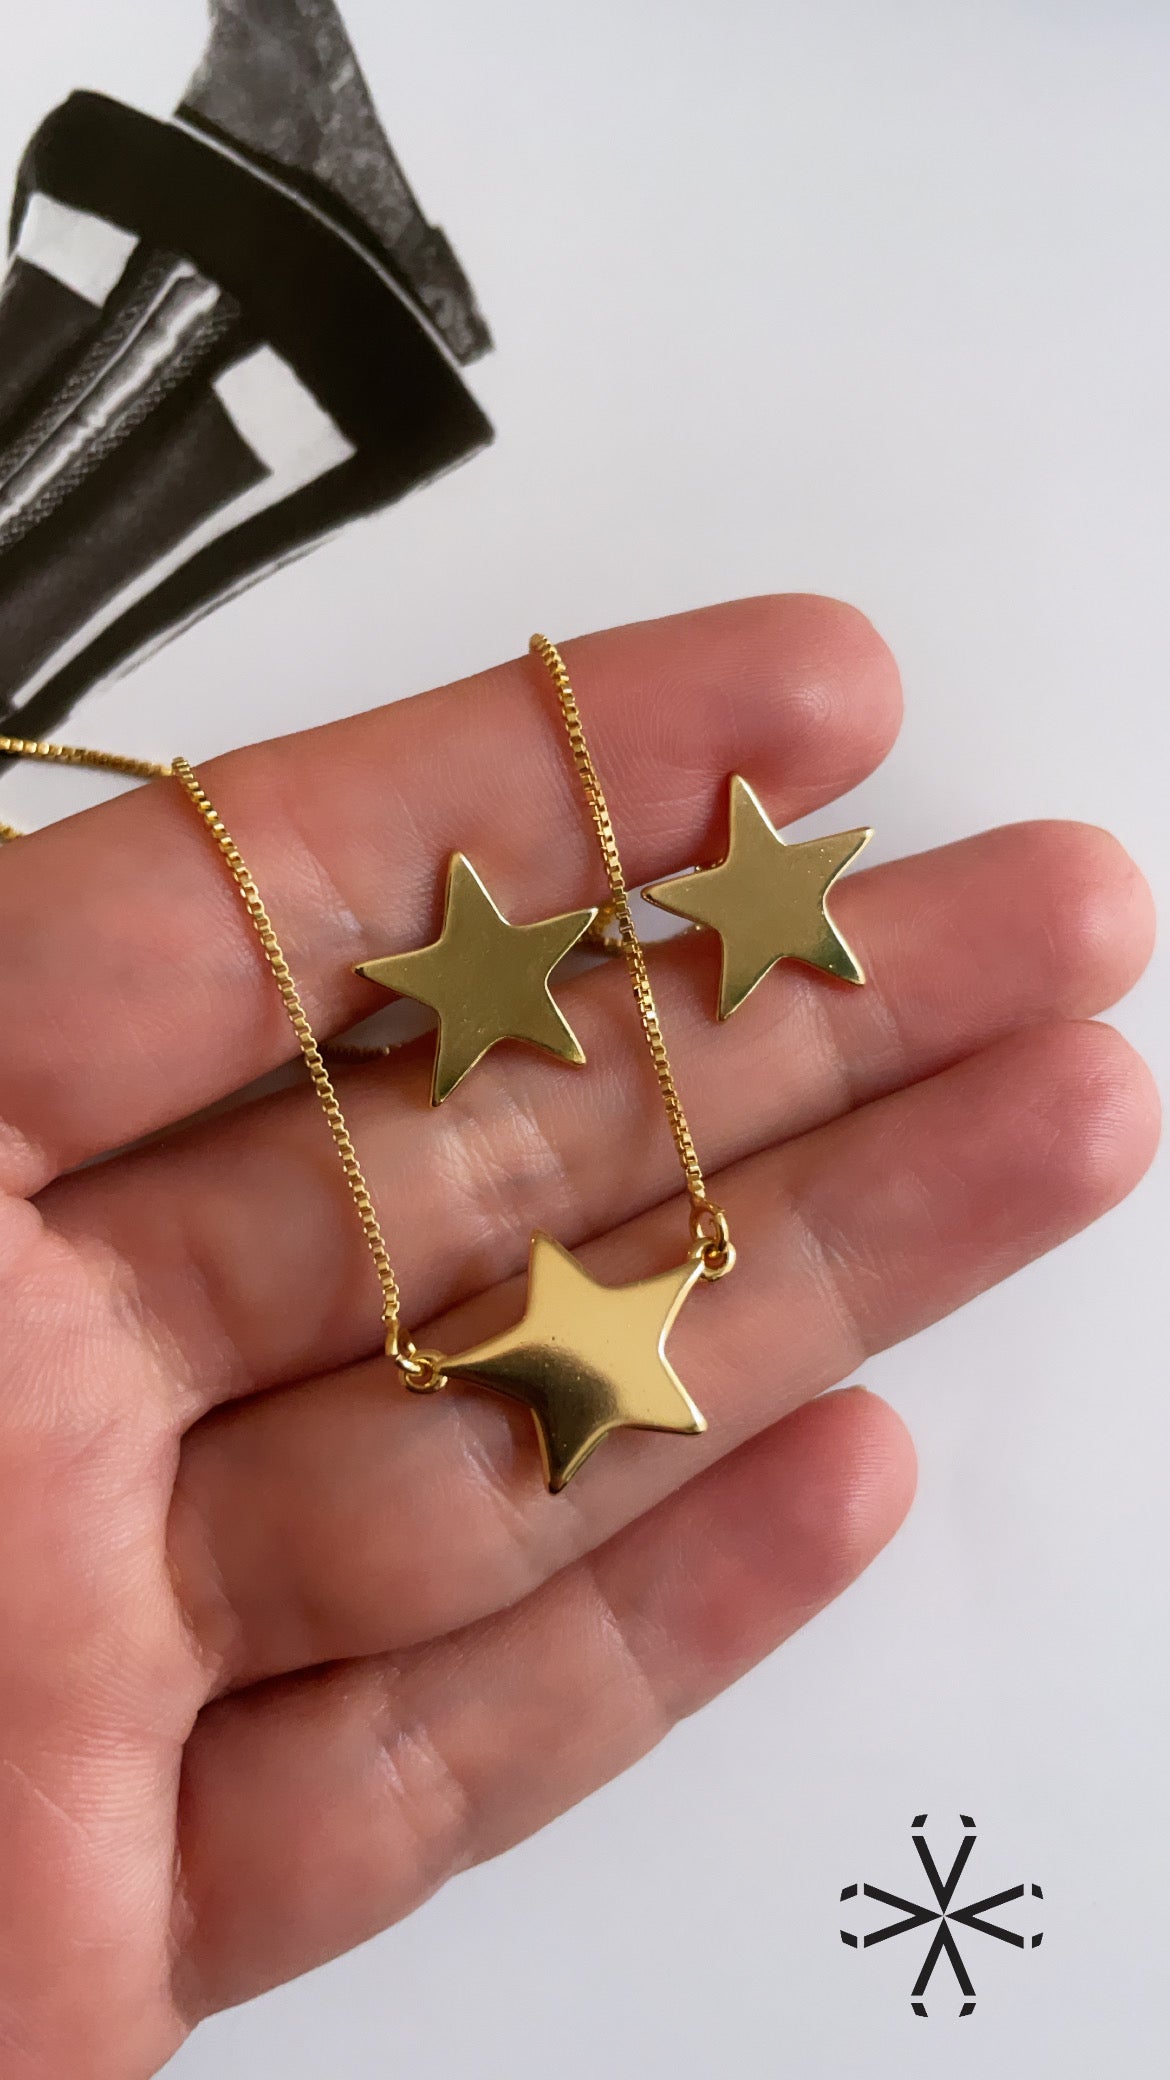 Star earrings and necklace gold plated set